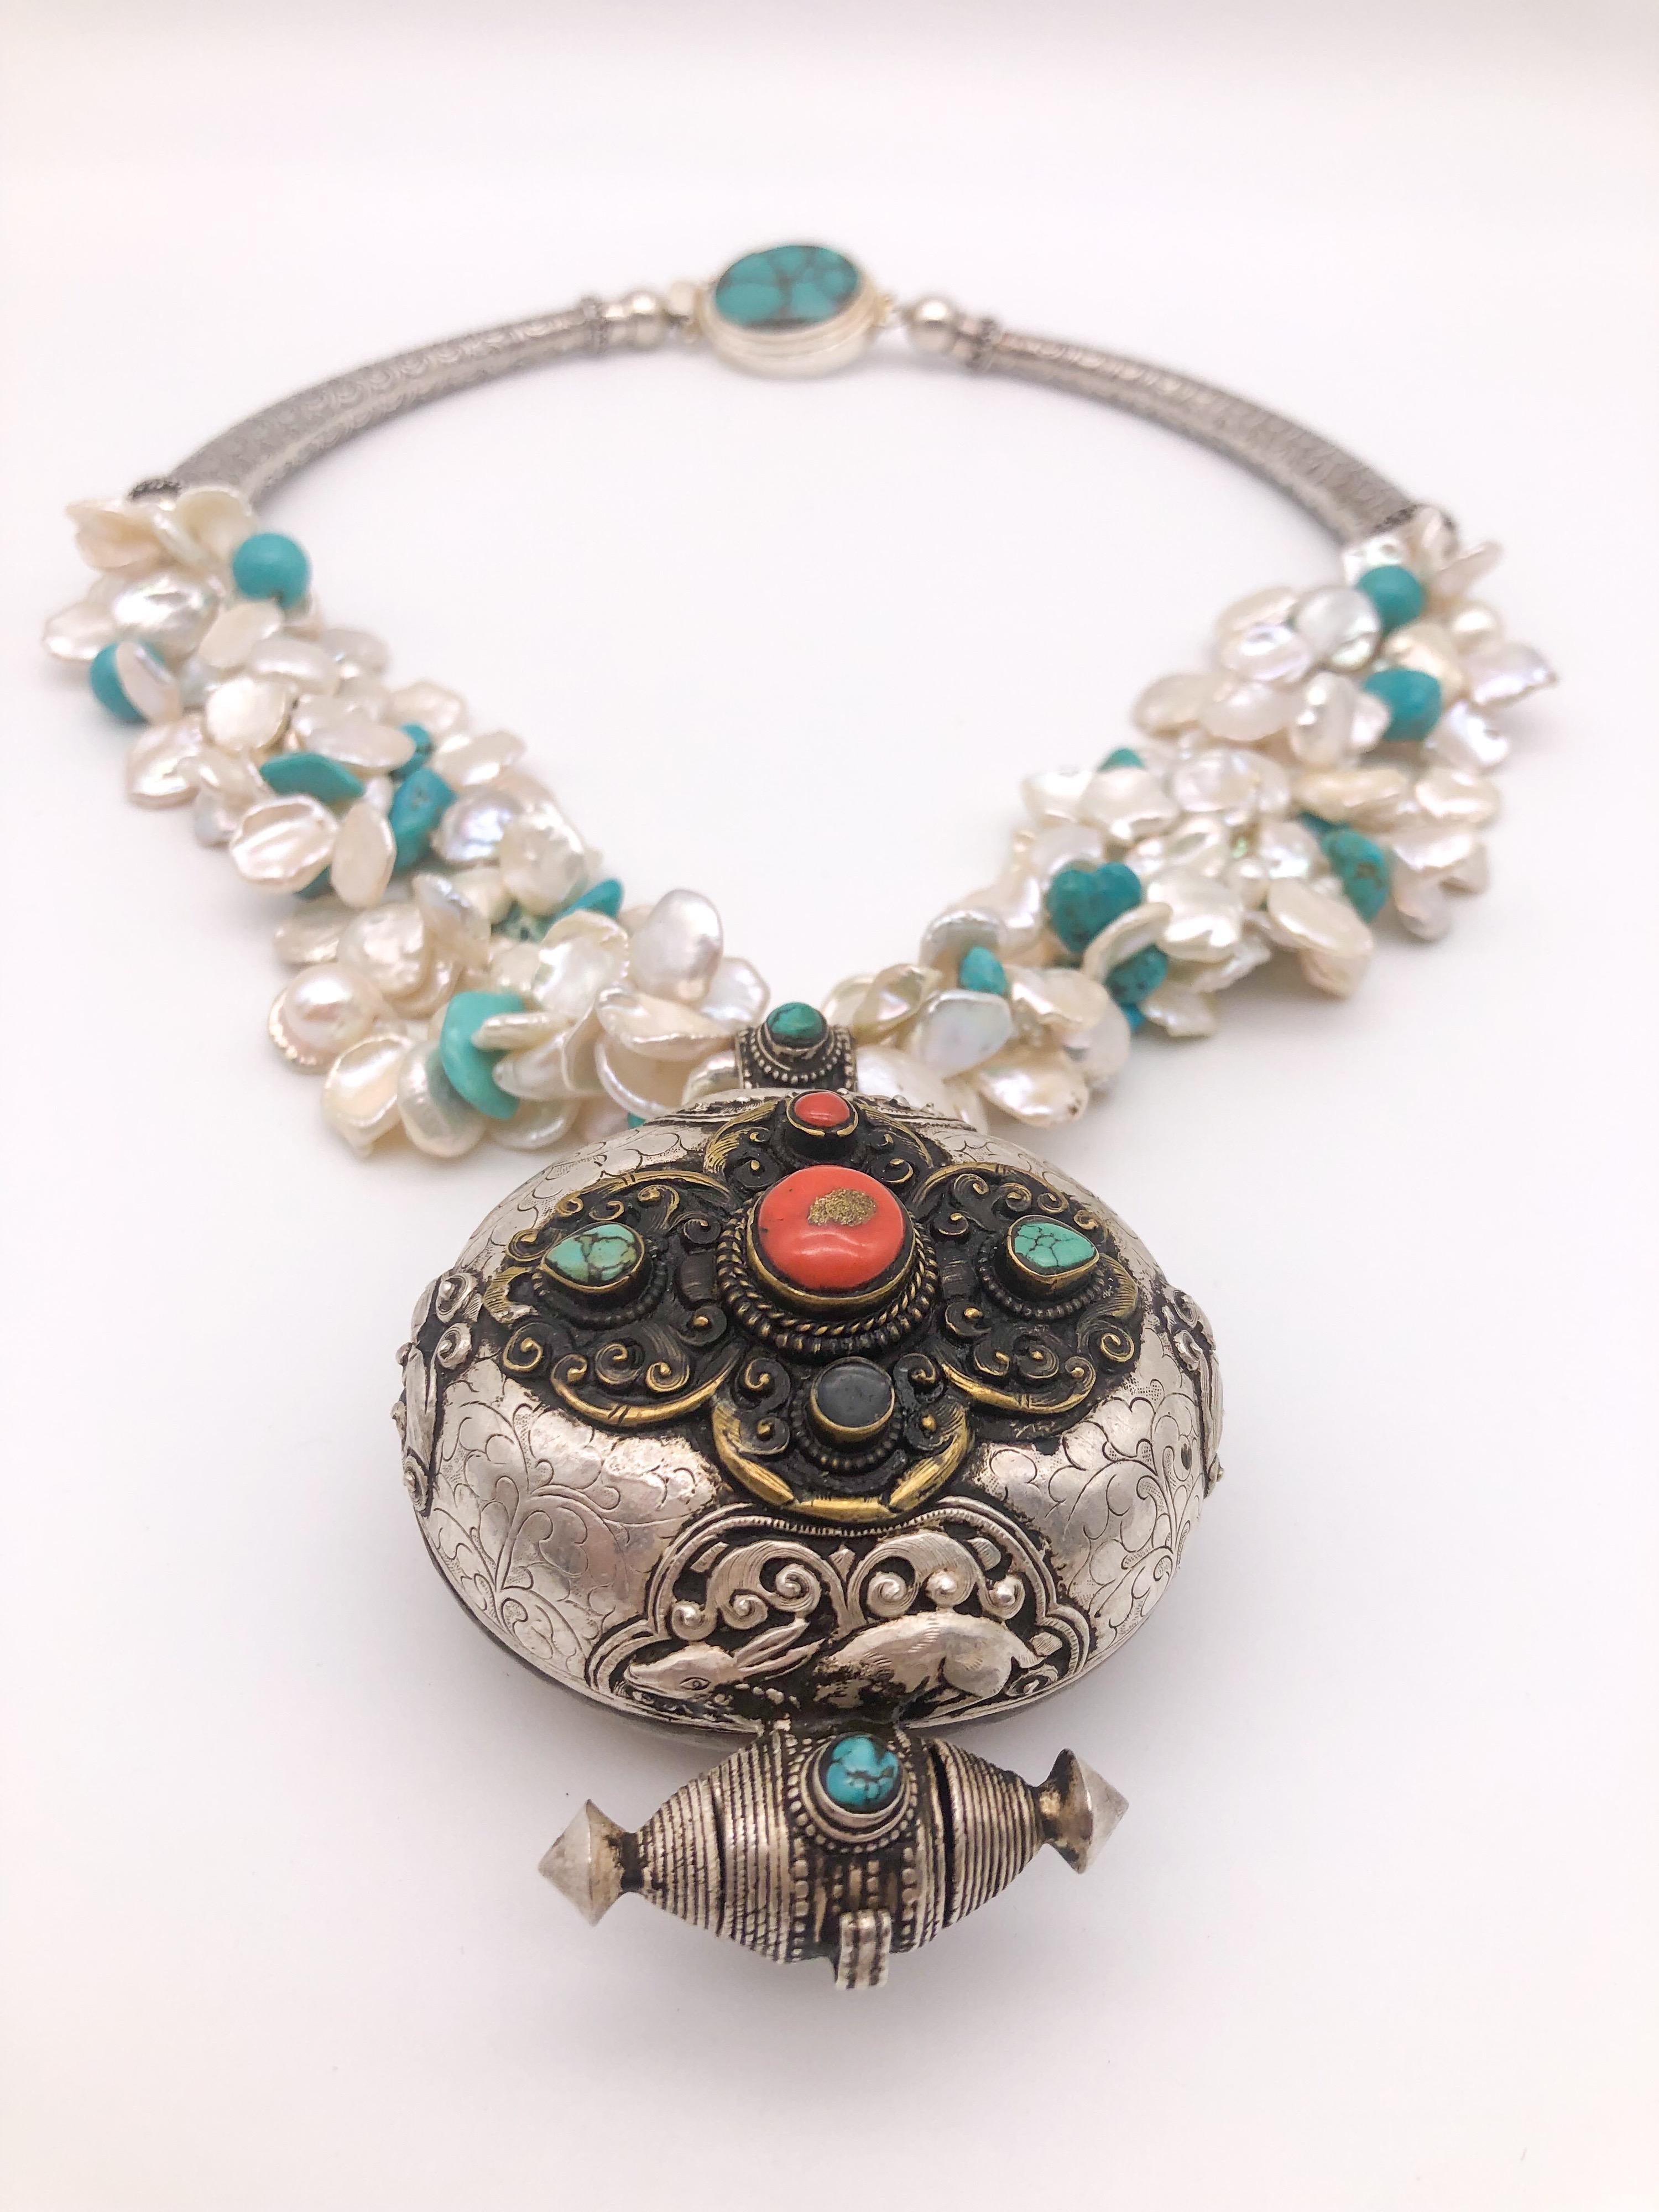 One-of-a-Kind
Multi-strand freshwater Keshi Pearl and Turquoise necklace with a fine quality oval Tibetan Ghau Prayer Box surrounded by smaller turquoise and coral. This piece is handcrafted from hand-hammered Sterling Silver with a copper back. The